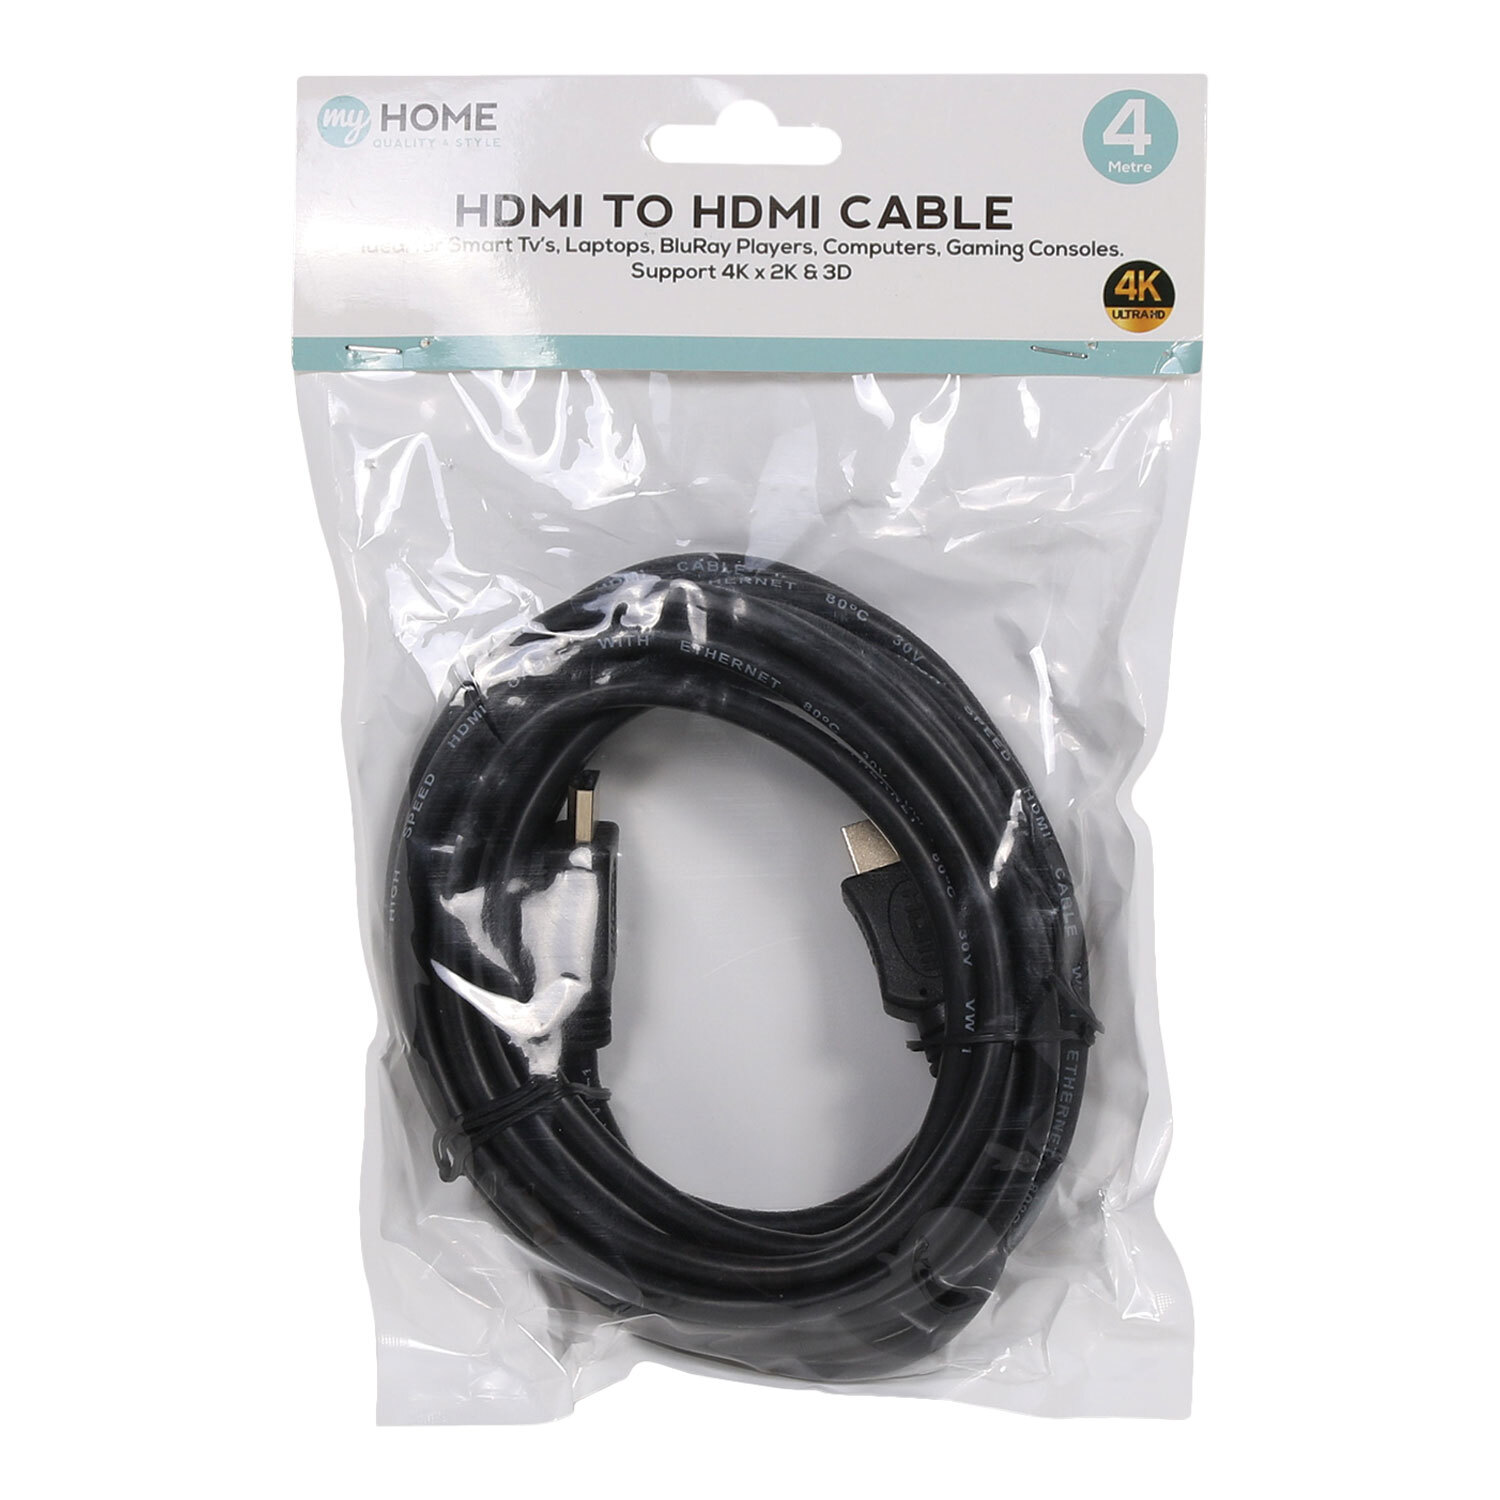 My Home HDMI to HDMI Long Cable 4m Image